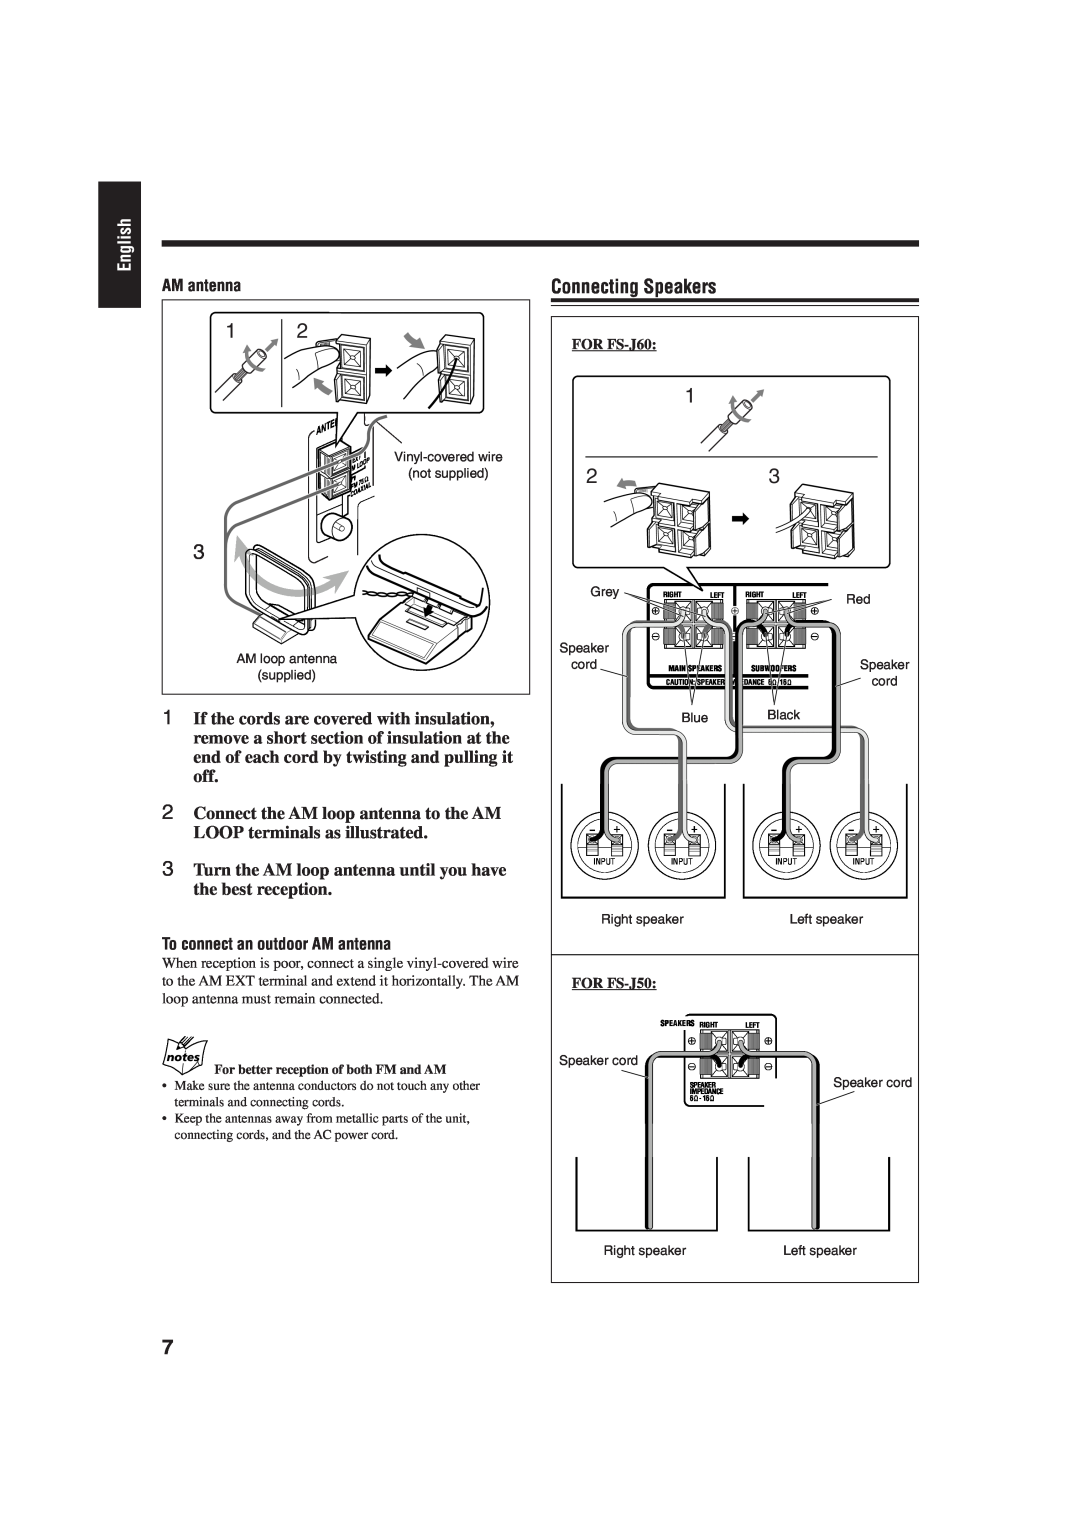 JVC FS-J50 Connecting Speakers, Connect the AM loop antenna to the AM LOOP terminals as illustrated, AM antenna, English 